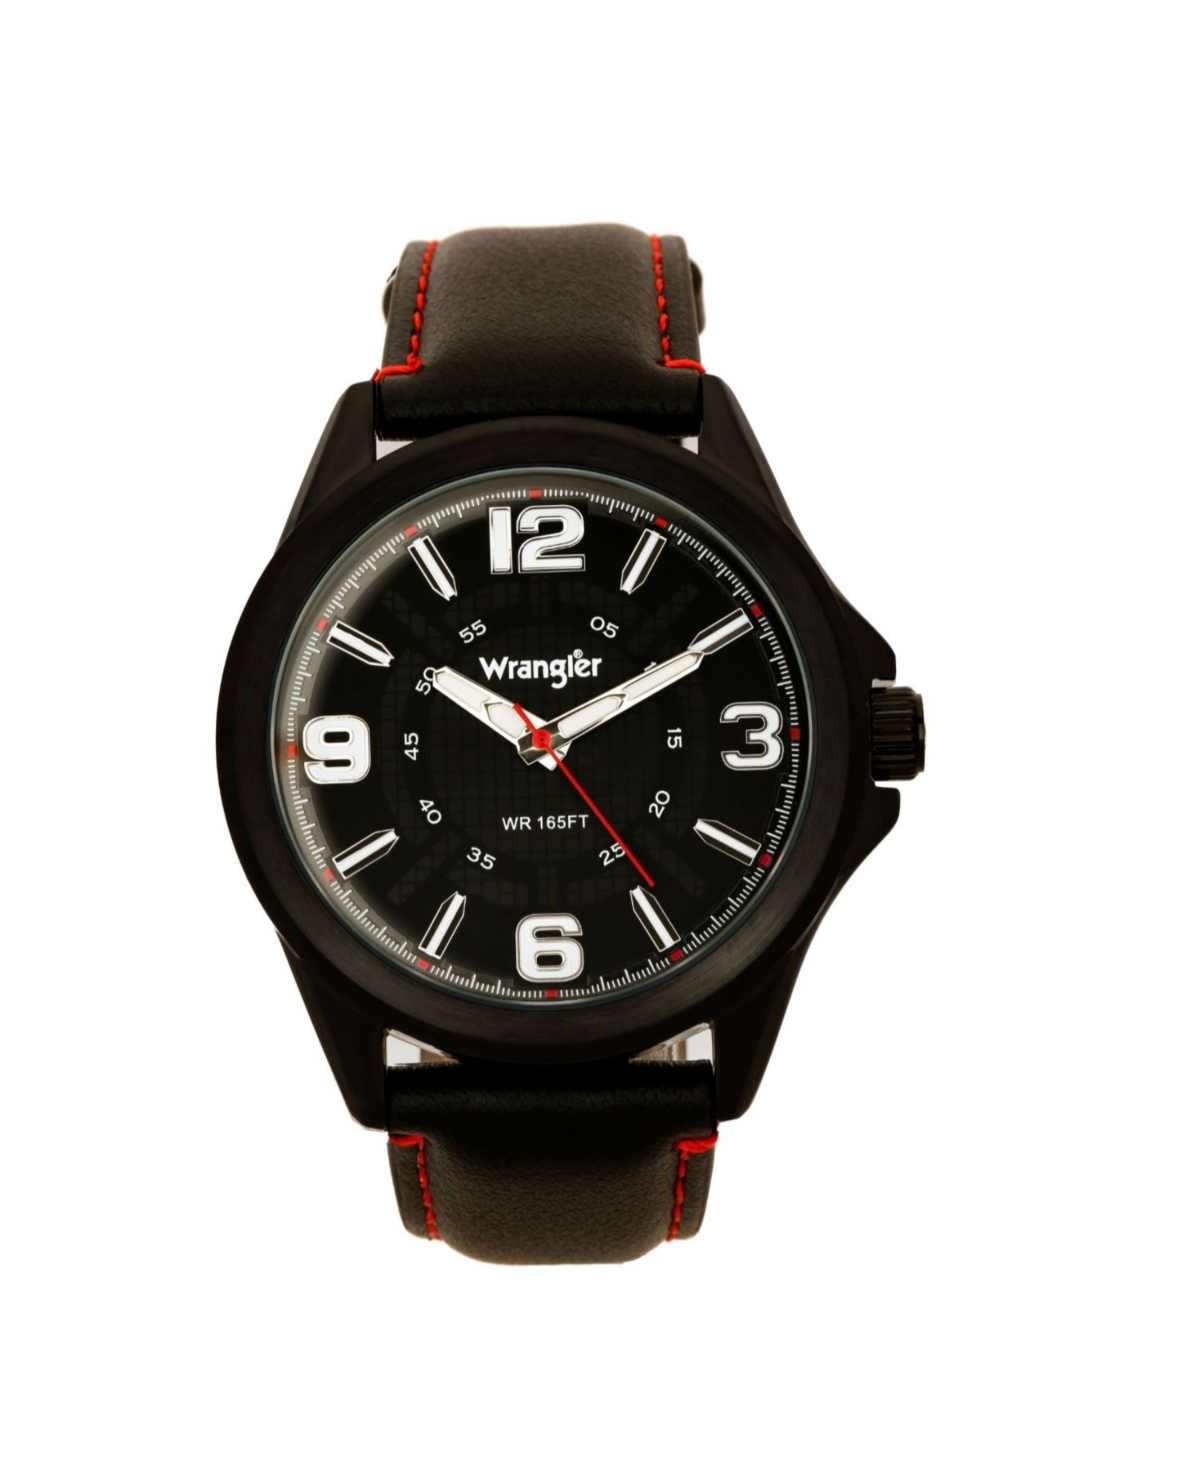 Men's Watch, 48MM Ip Black Case with Cutout Black Dial, White Arabic Numerals, Black Strap with Red Stitching, Analog , Red Second Hand - Bla